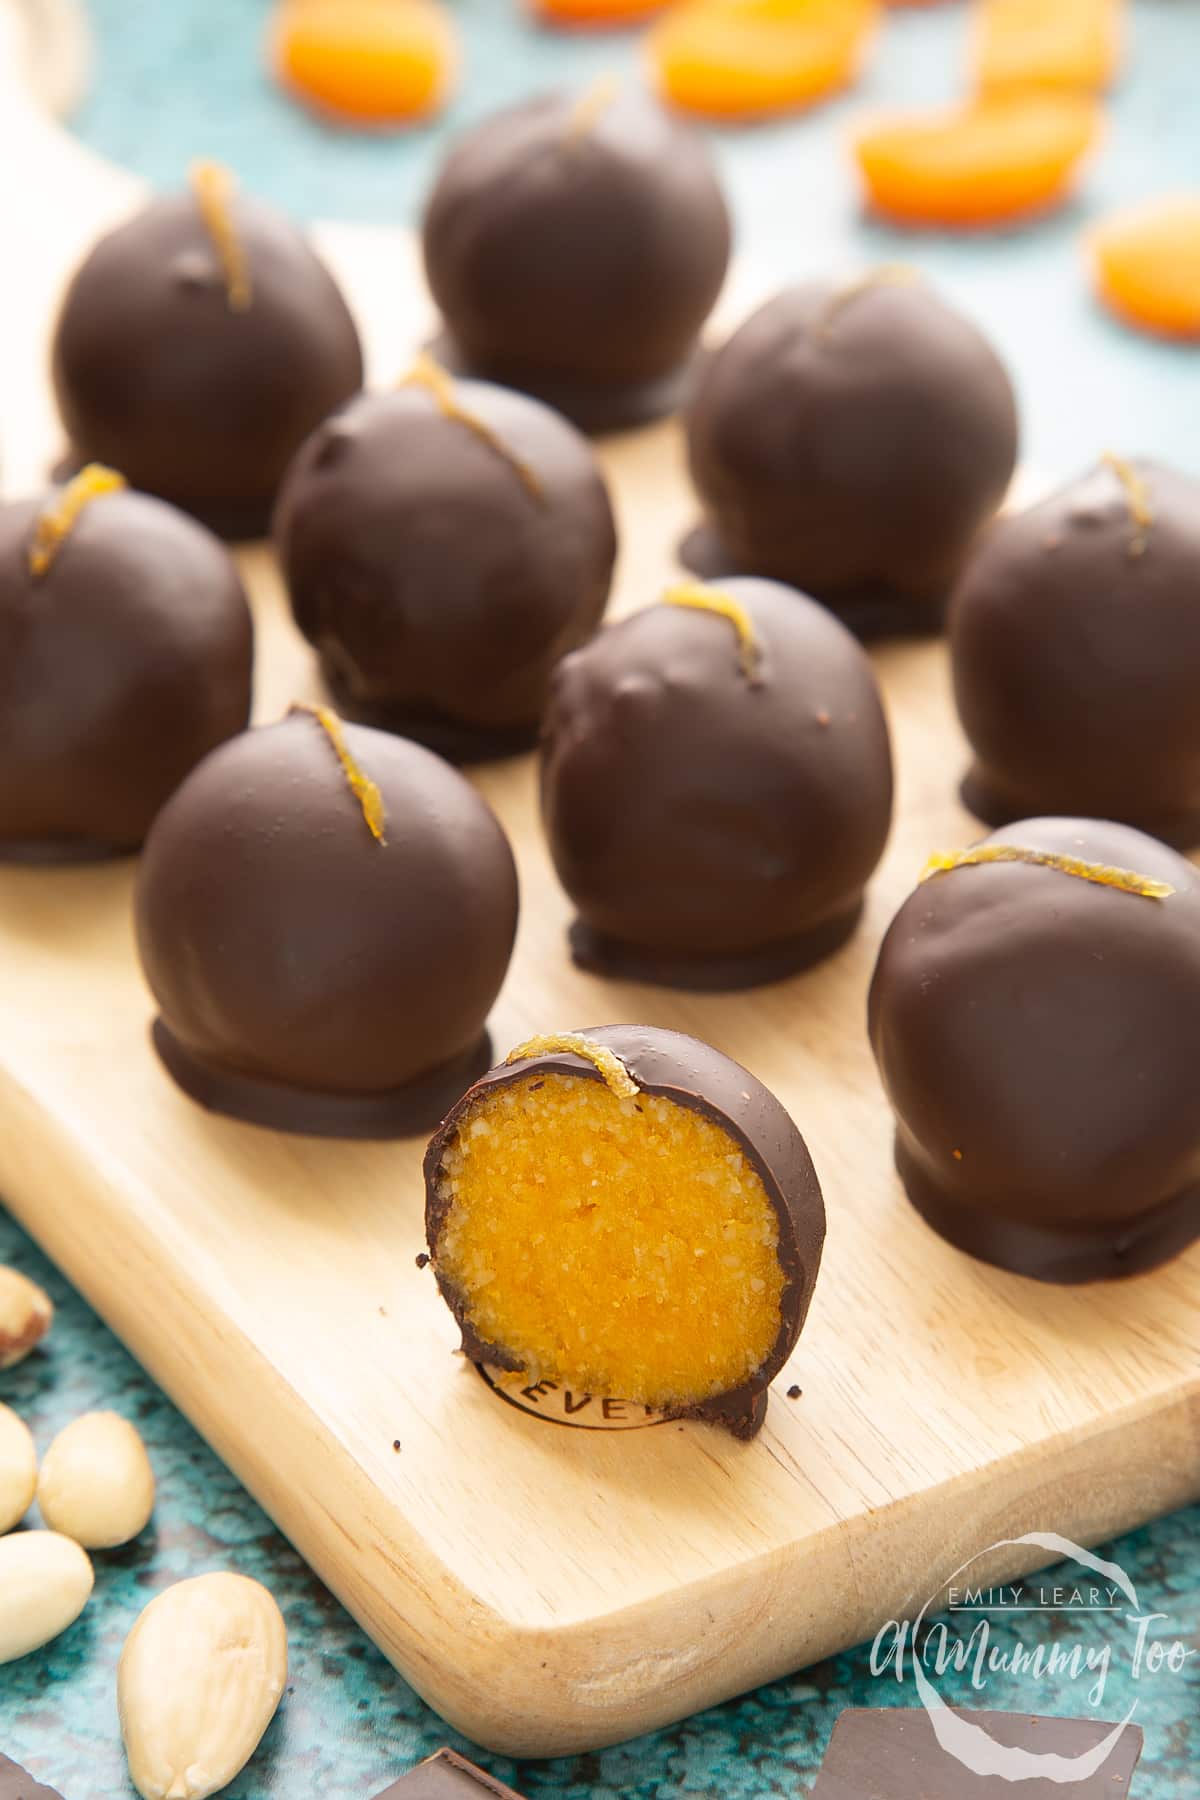 Chocolate apricot balls arranged on a wooden board. Dried apricots, blanched almonds and squares of dark chocolate surround the board. In the foreground sits half a ball, revealing the bright orange filling.